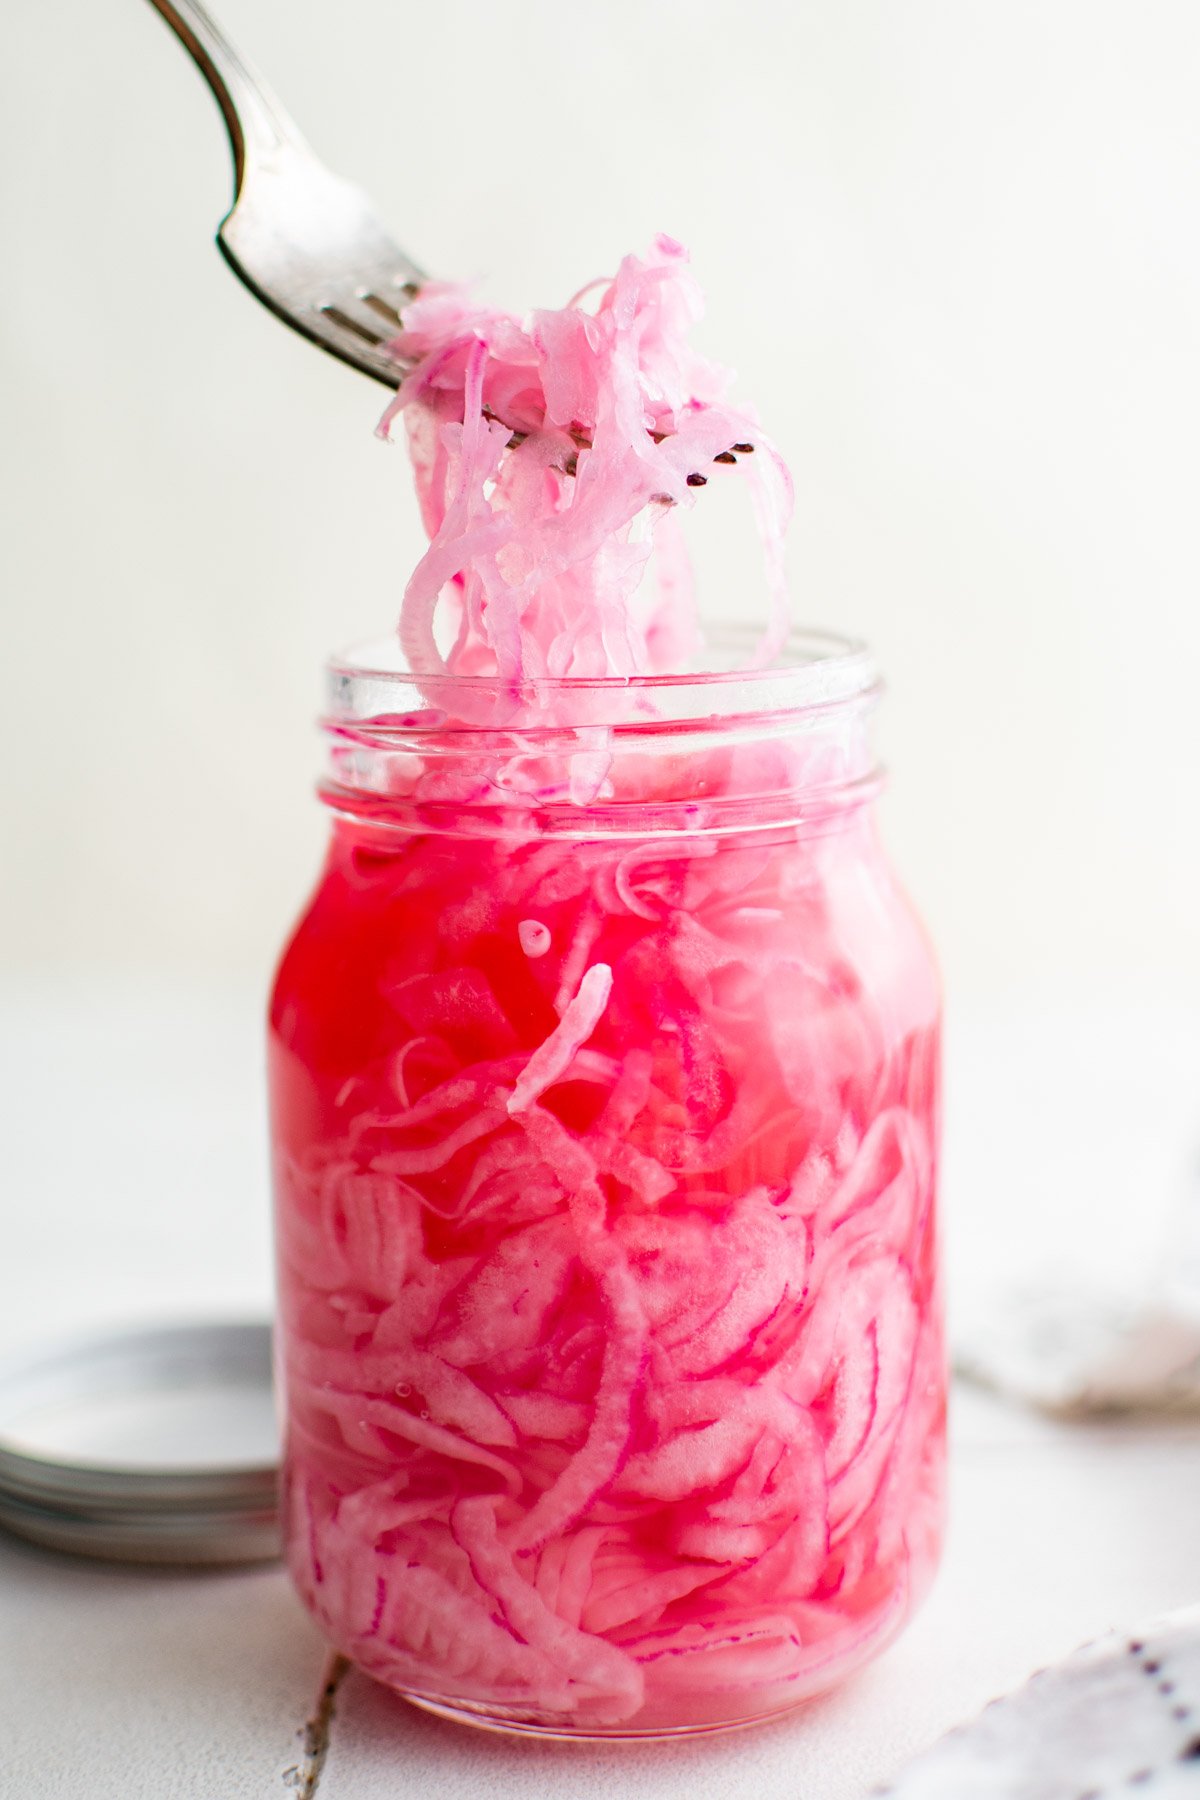 Pickled red onions in a jar with liquid and a fork.